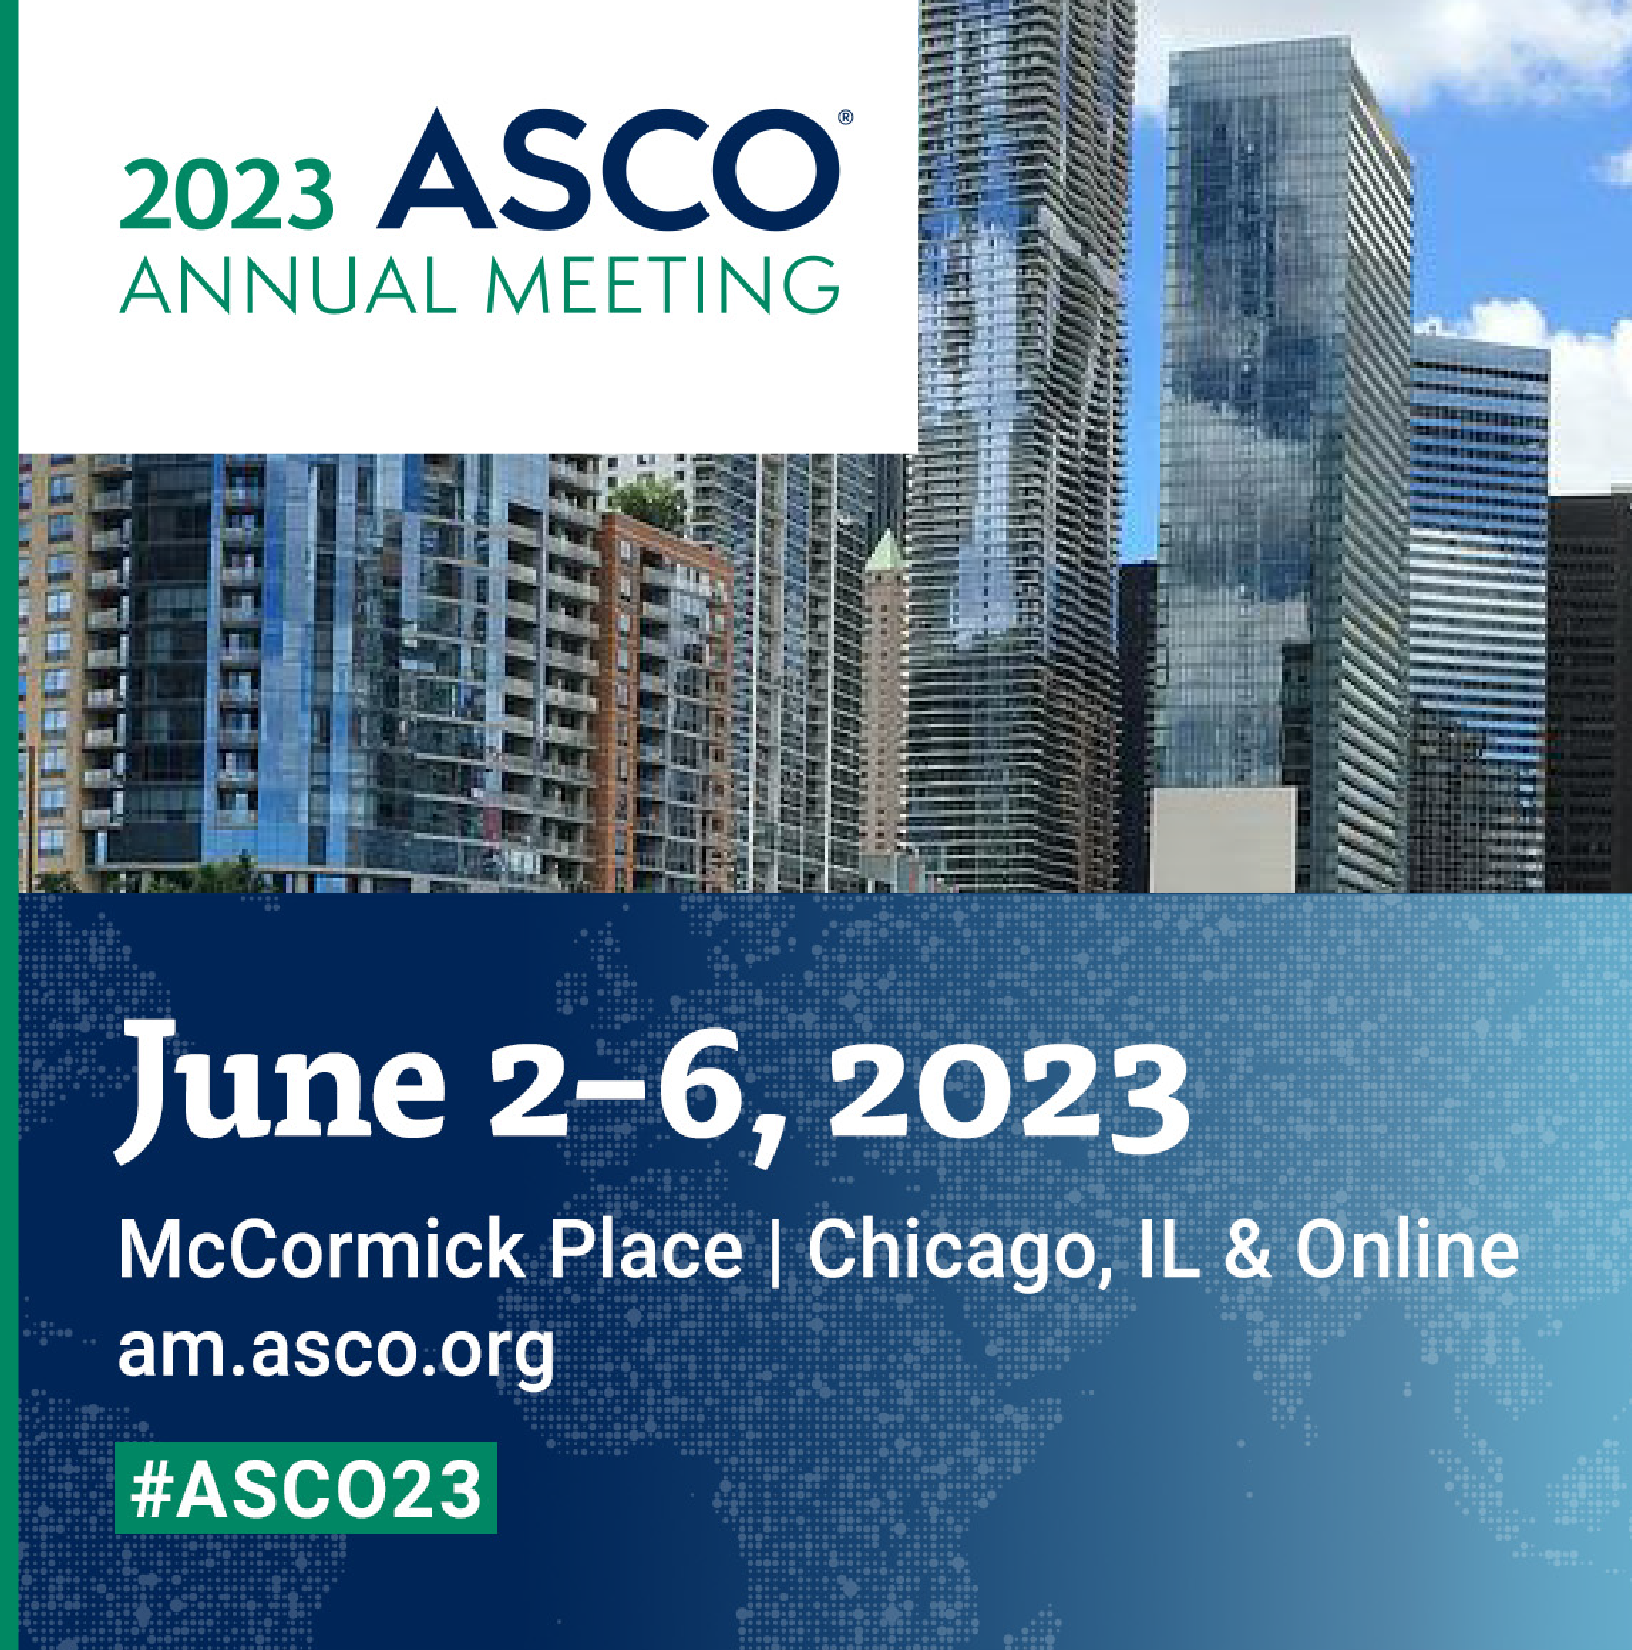 Medflixs AMERICAN SOCIETY OF CLINICAL ONCOLOGY Annual Meeting ASCO 2023